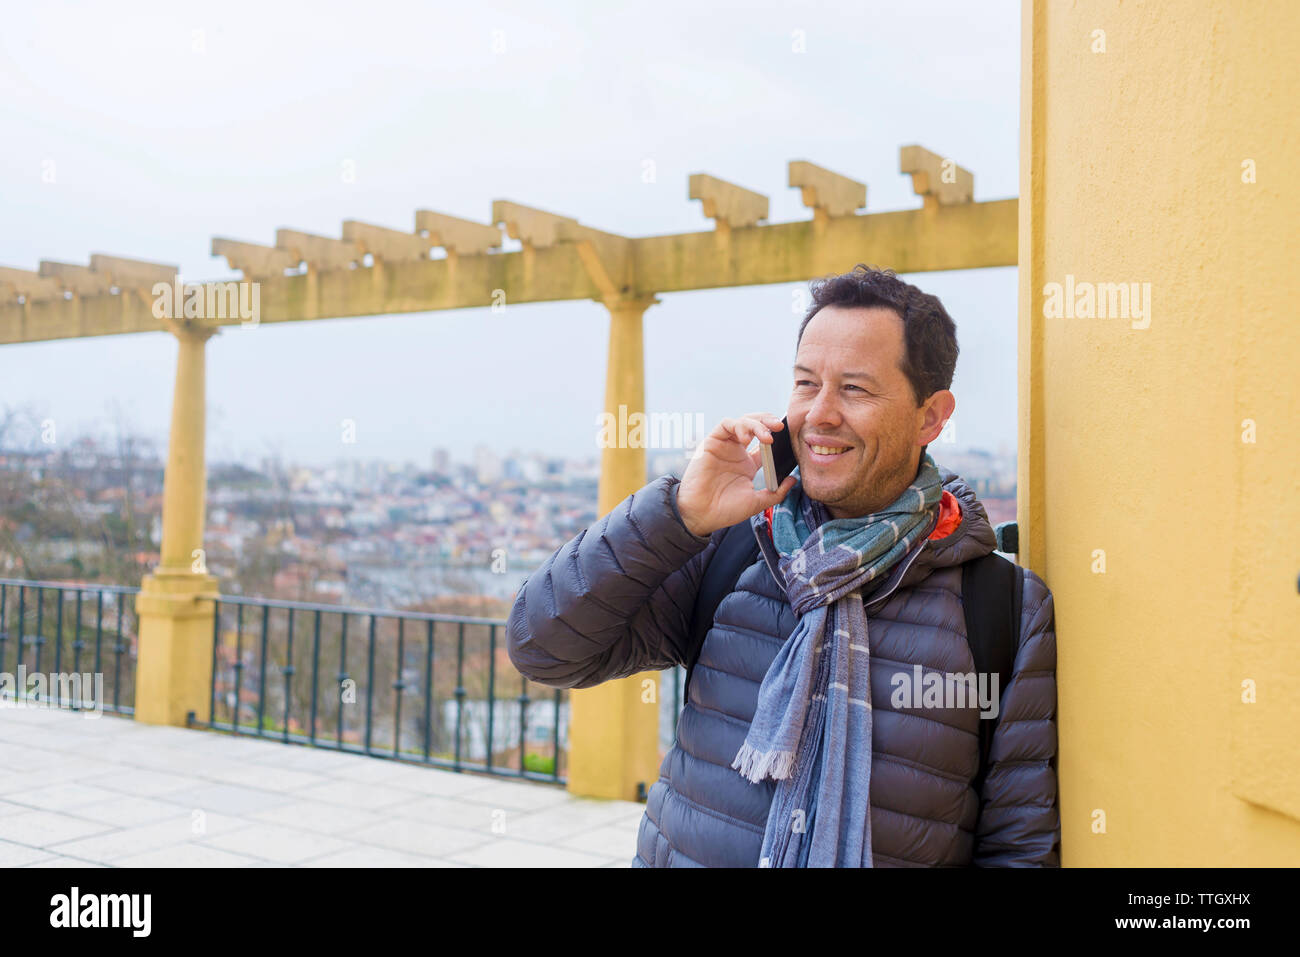 Smiling tourist wearing warm clothing answering smart phone while looking away in city Stock Photo